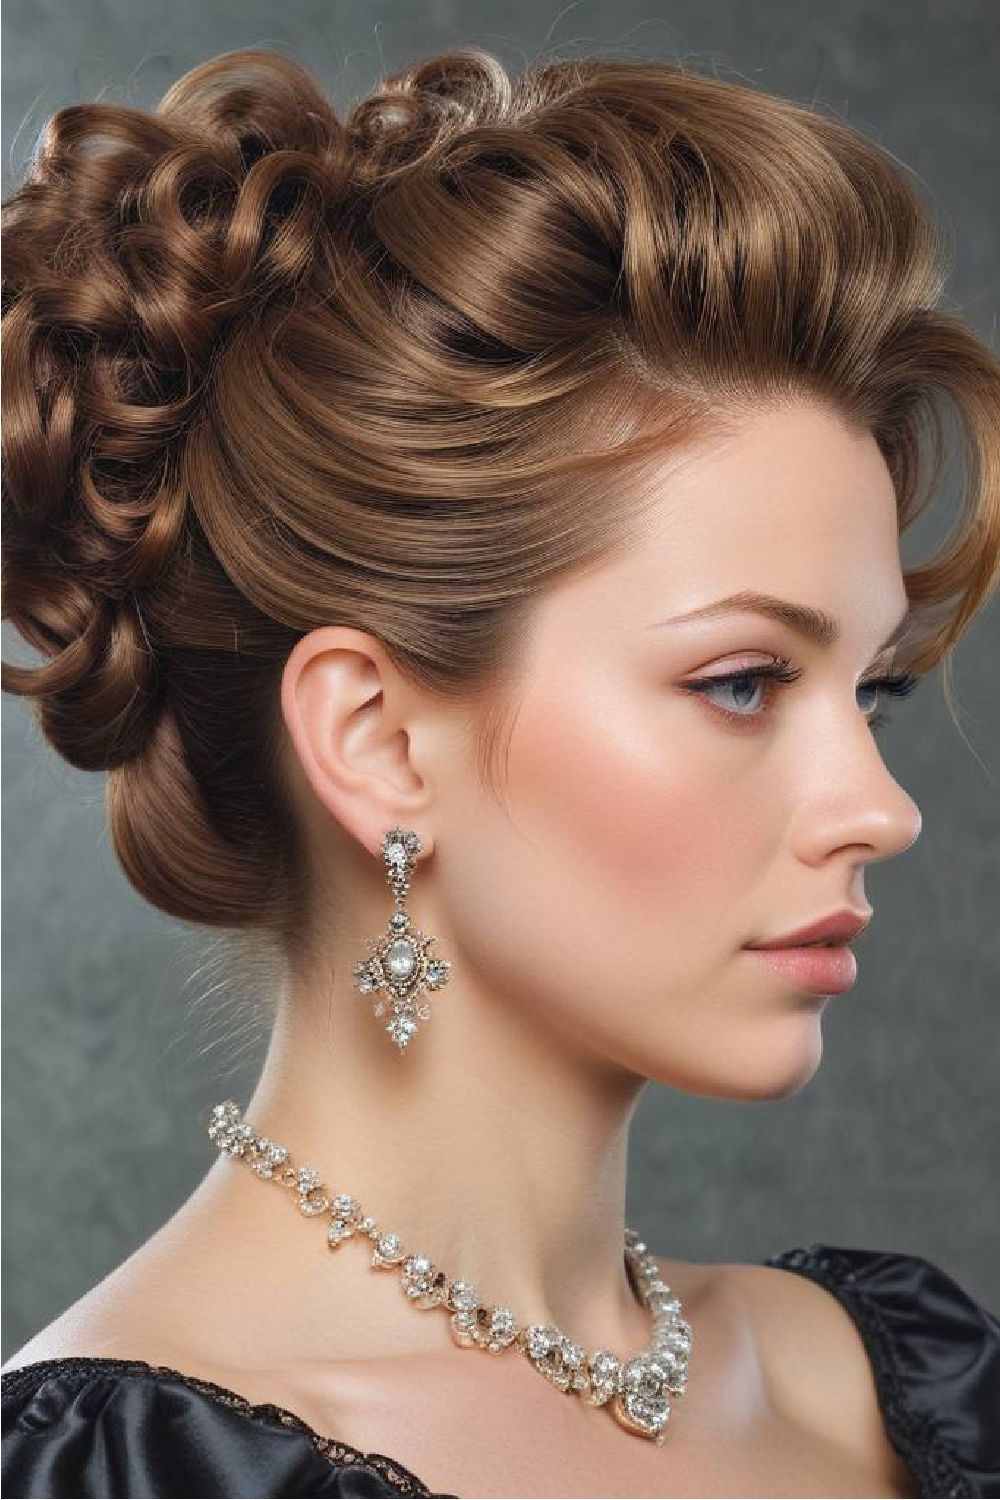 the pompadour victorian hairstyle